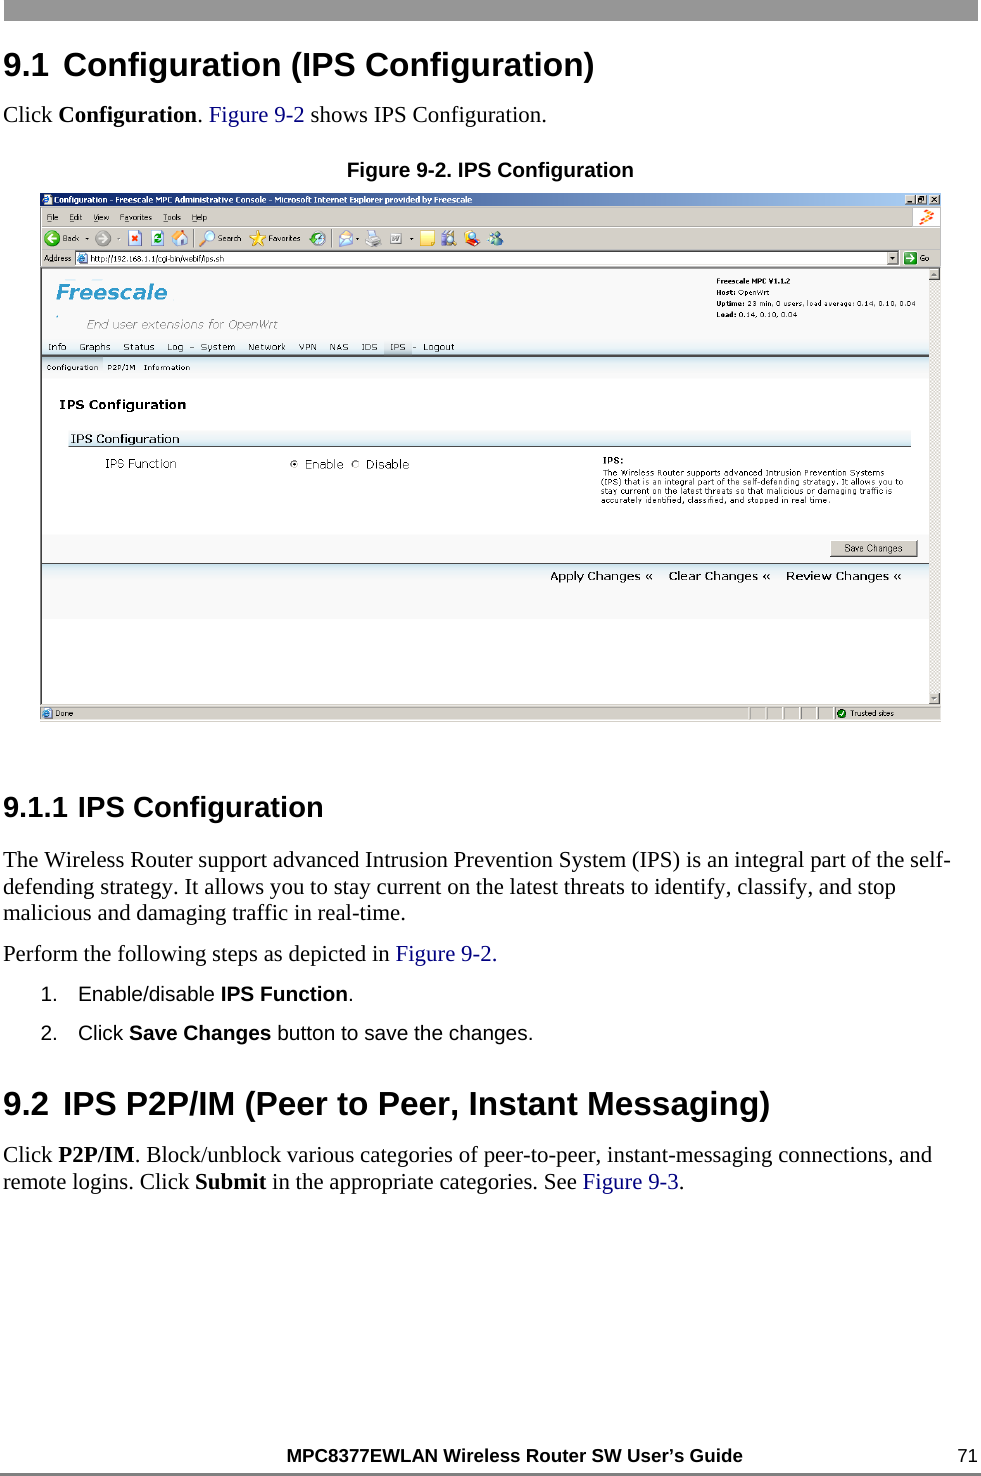                                                          MPC8377EWLAN Wireless Router SW User’s Guide    71 9.1 Configuration (IPS Configuration) Click Configuration. Figure 9-2 shows IPS Configuration.  Figure 9-2. IPS Configuration  9.1.1 IPS Configuration The Wireless Router support advanced Intrusion Prevention System (IPS) is an integral part of the self-defending strategy. It allows you to stay current on the latest threats to identify, classify, and stop malicious and damaging traffic in real-time. Perform the following steps as depicted in Figure 9-2. 1. Enable/disable IPS Function. 2. Click Save Changes button to save the changes. 9.2 IPS P2P/IM (Peer to Peer, Instant Messaging) Click P2P/IM. Block/unblock various categories of peer-to-peer, instant-messaging connections, and remote logins. Click Submit in the appropriate categories. See Figure 9-3. 